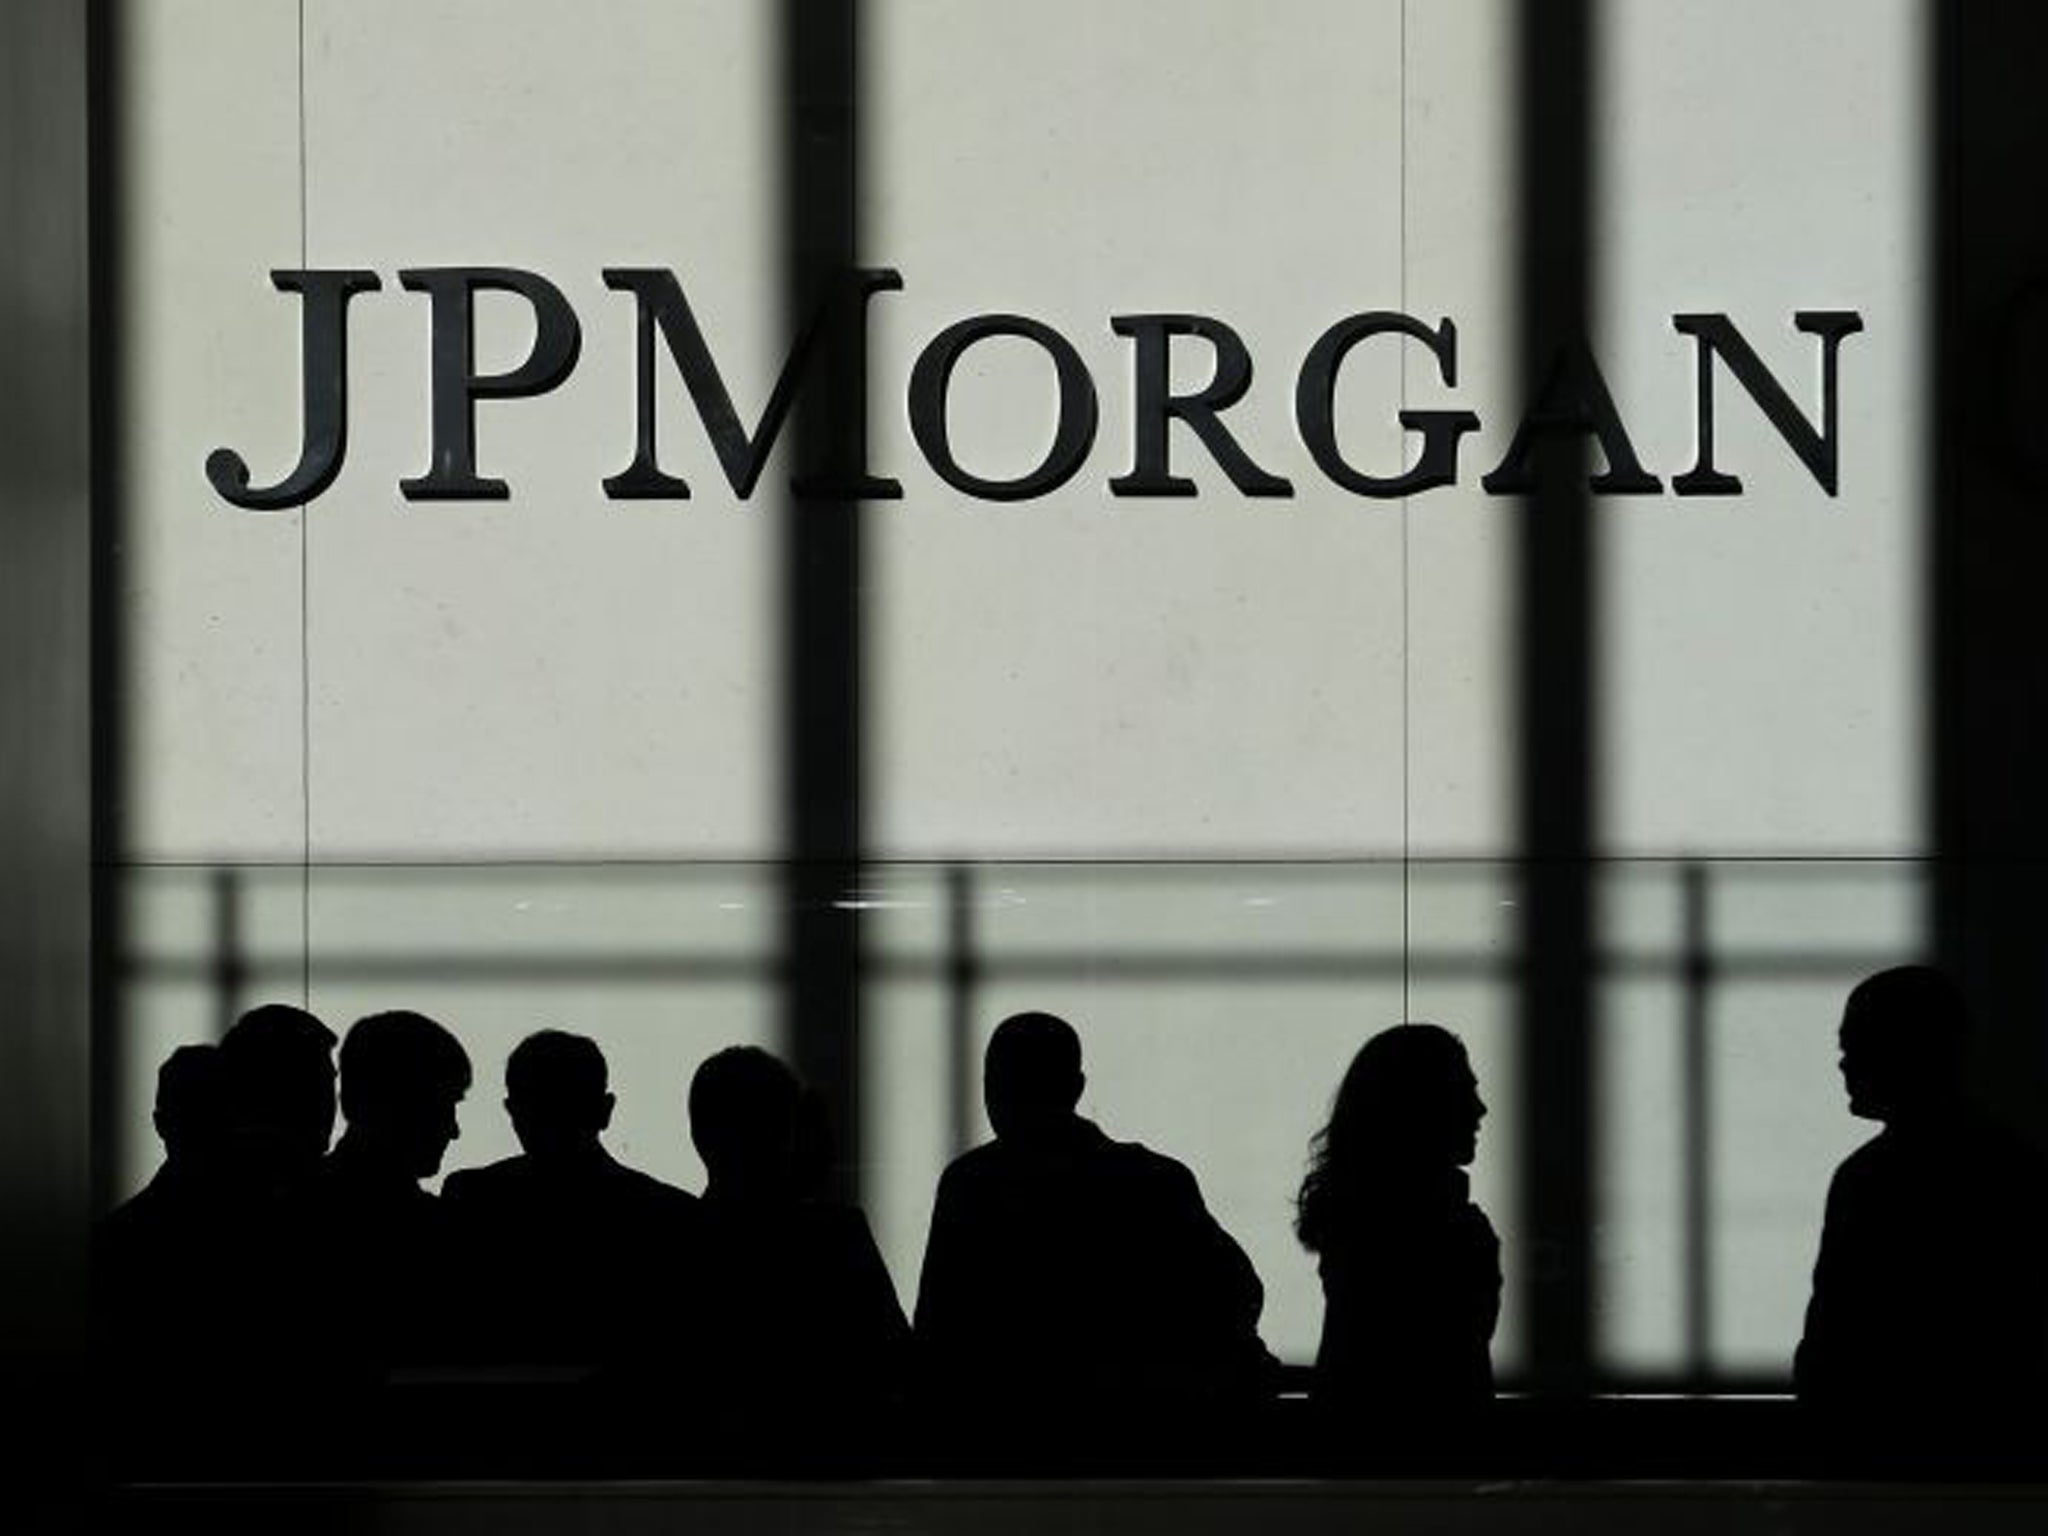 Under the terms of the settlement, JPMorgan admits no wrongdoing